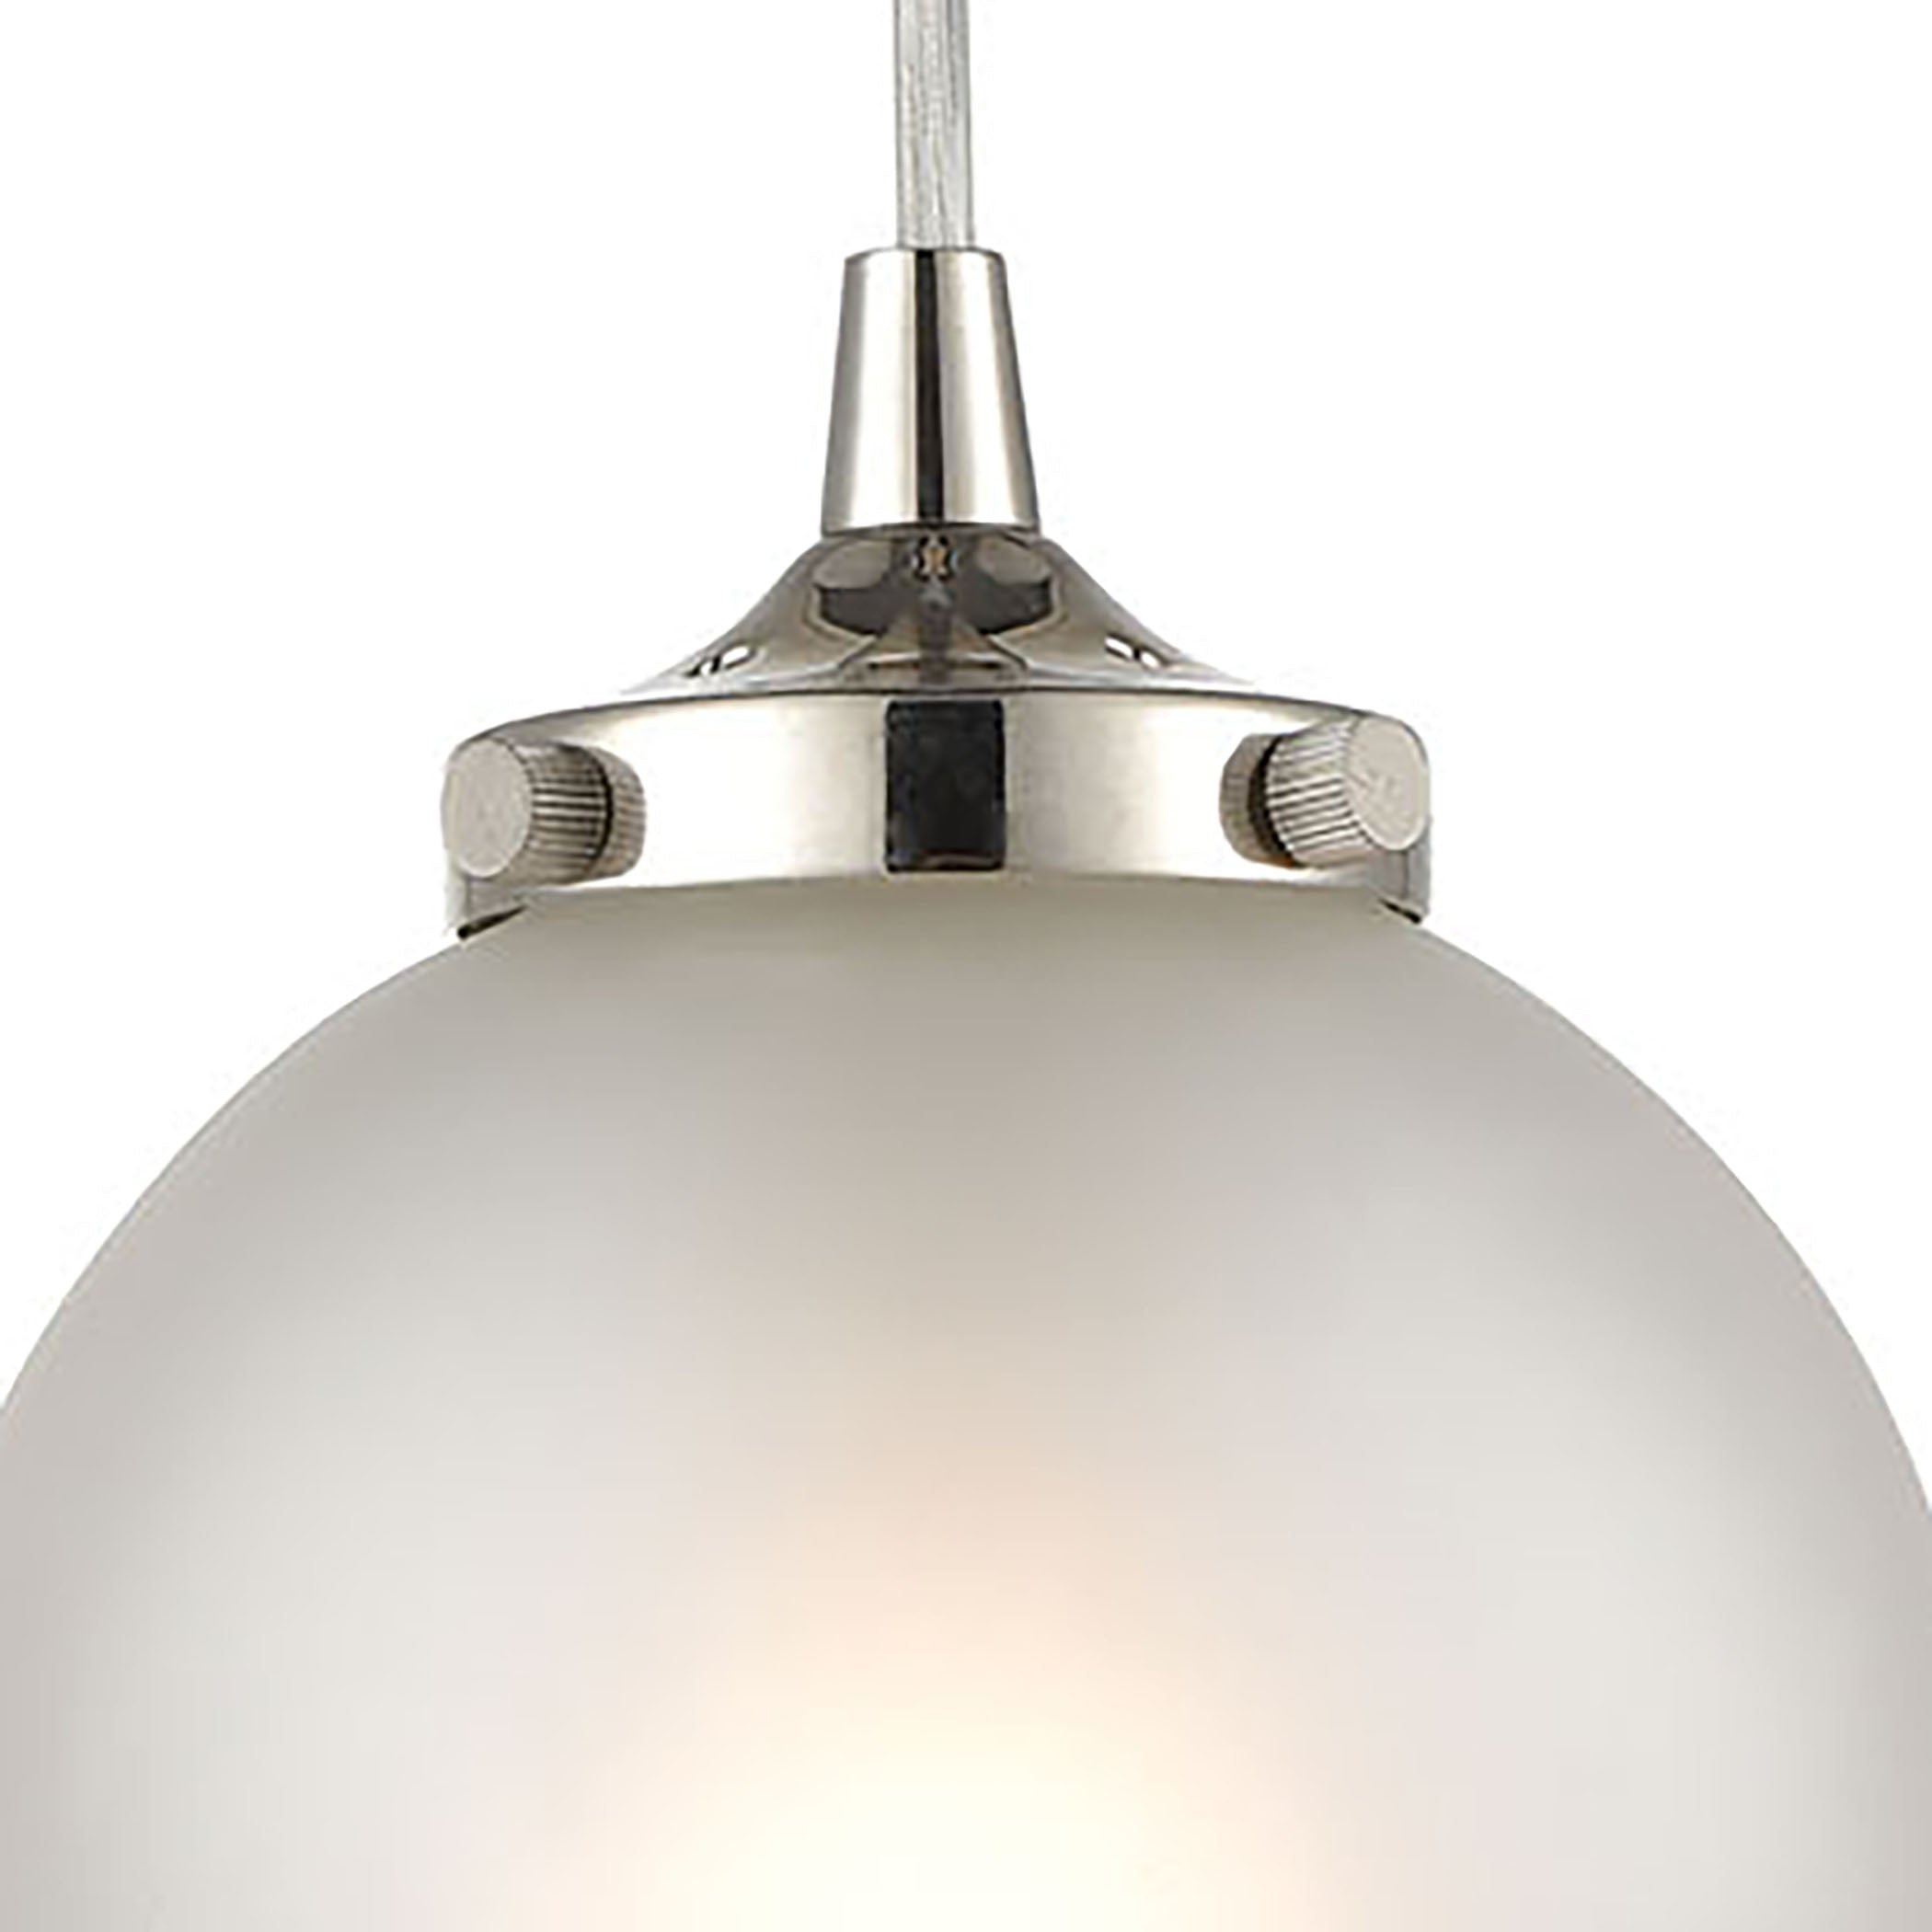 ELK Lighting 15363/1 Boudreaux 1-Light Mini Pendant in Polished Nickel with Frosted